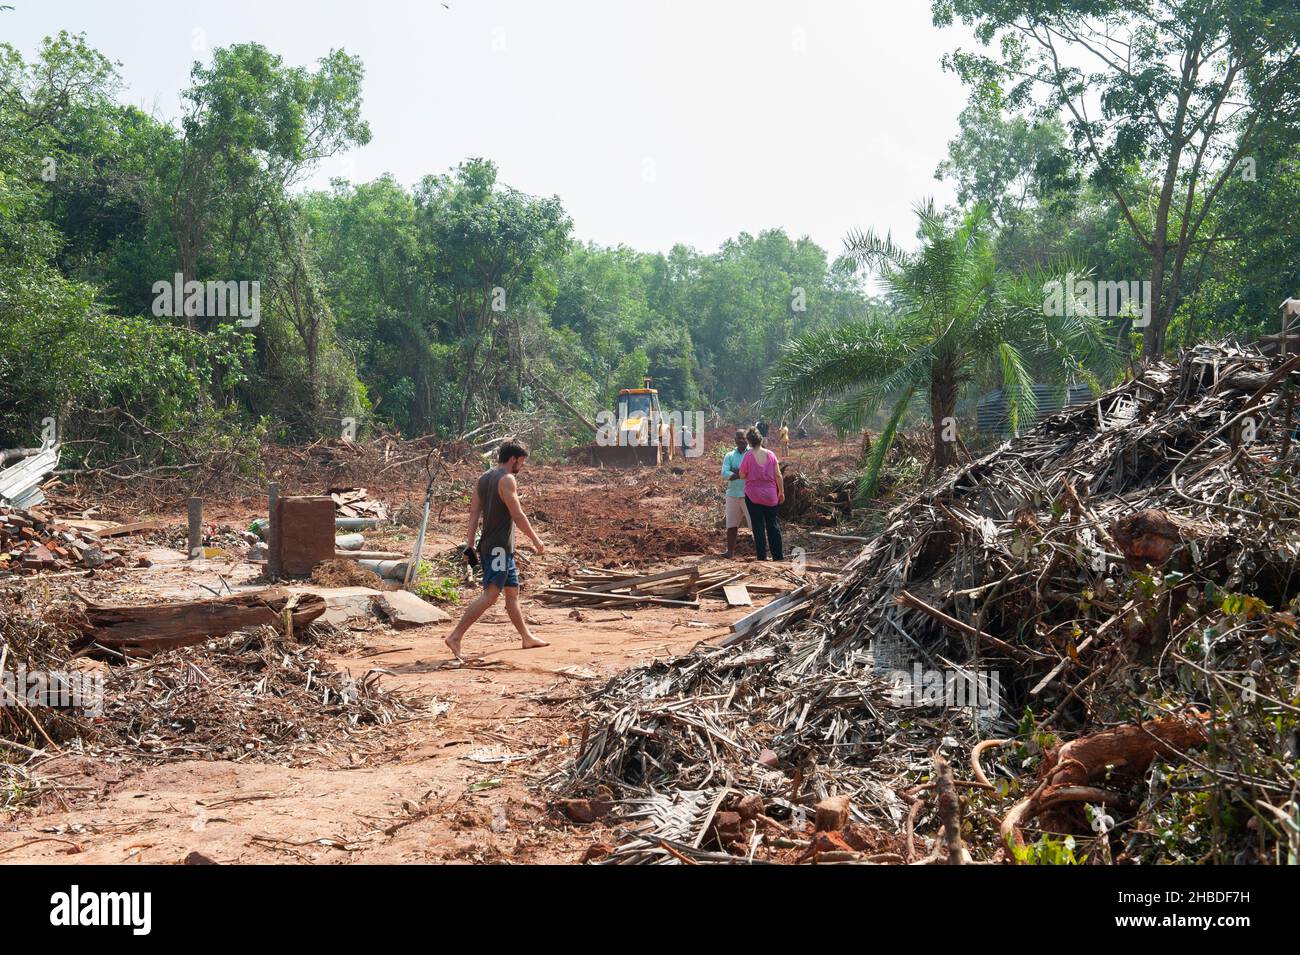 Auroville, India - 15th December 2021: The damage done by a rapid intervention of 3 JCB excavators in the Auroville forest. Stock Photo